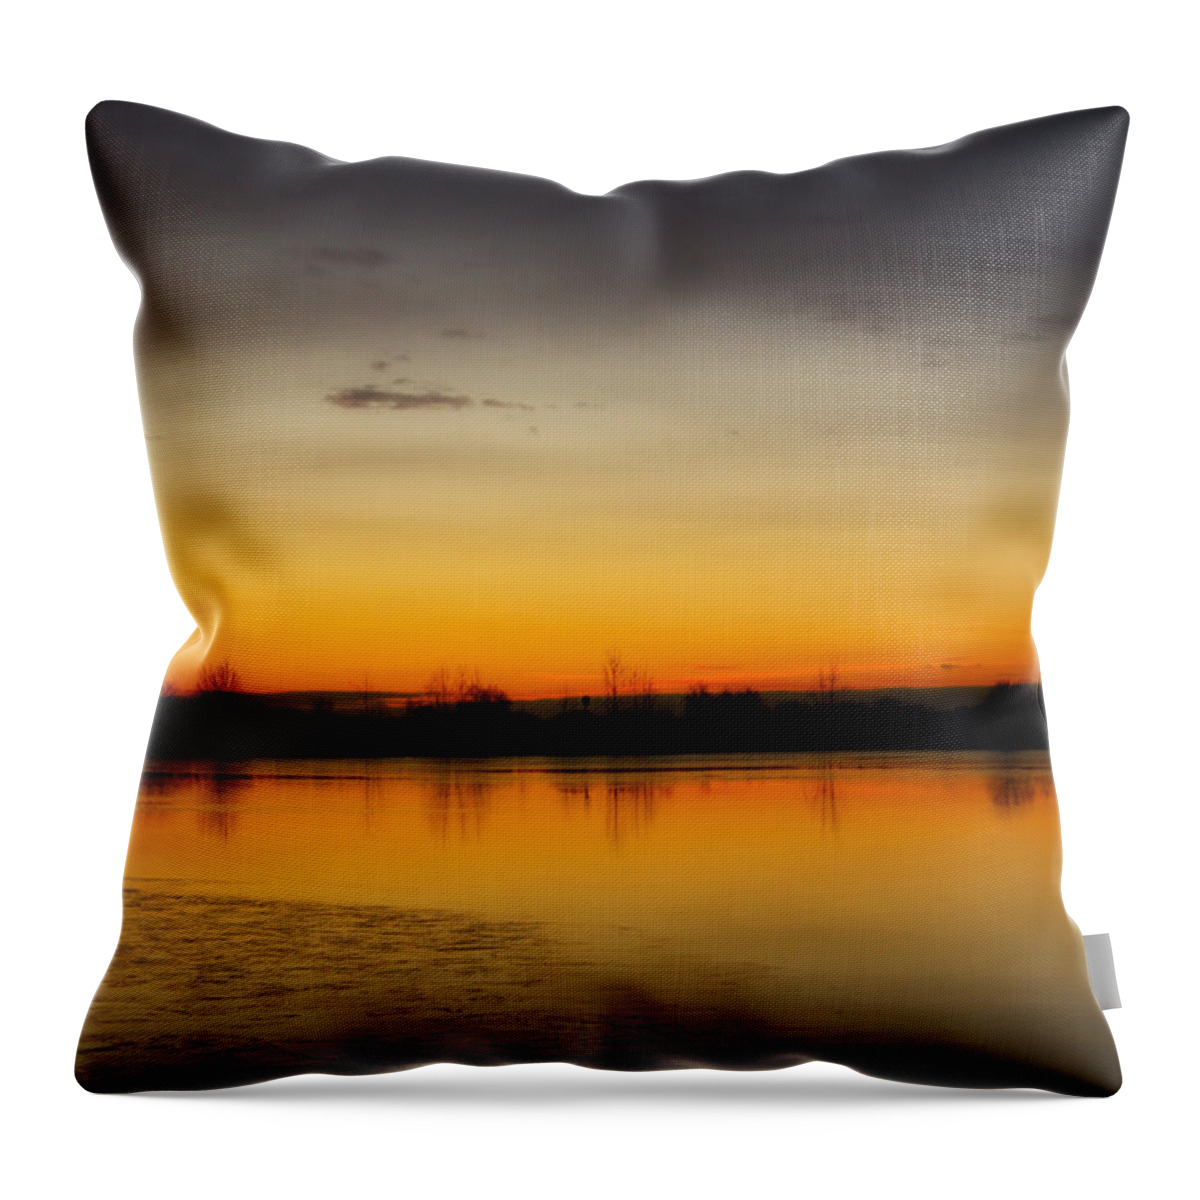 Pella Ponds Throw Pillow featuring the photograph Pella Ponds December 16th Sunrise by James BO Insogna